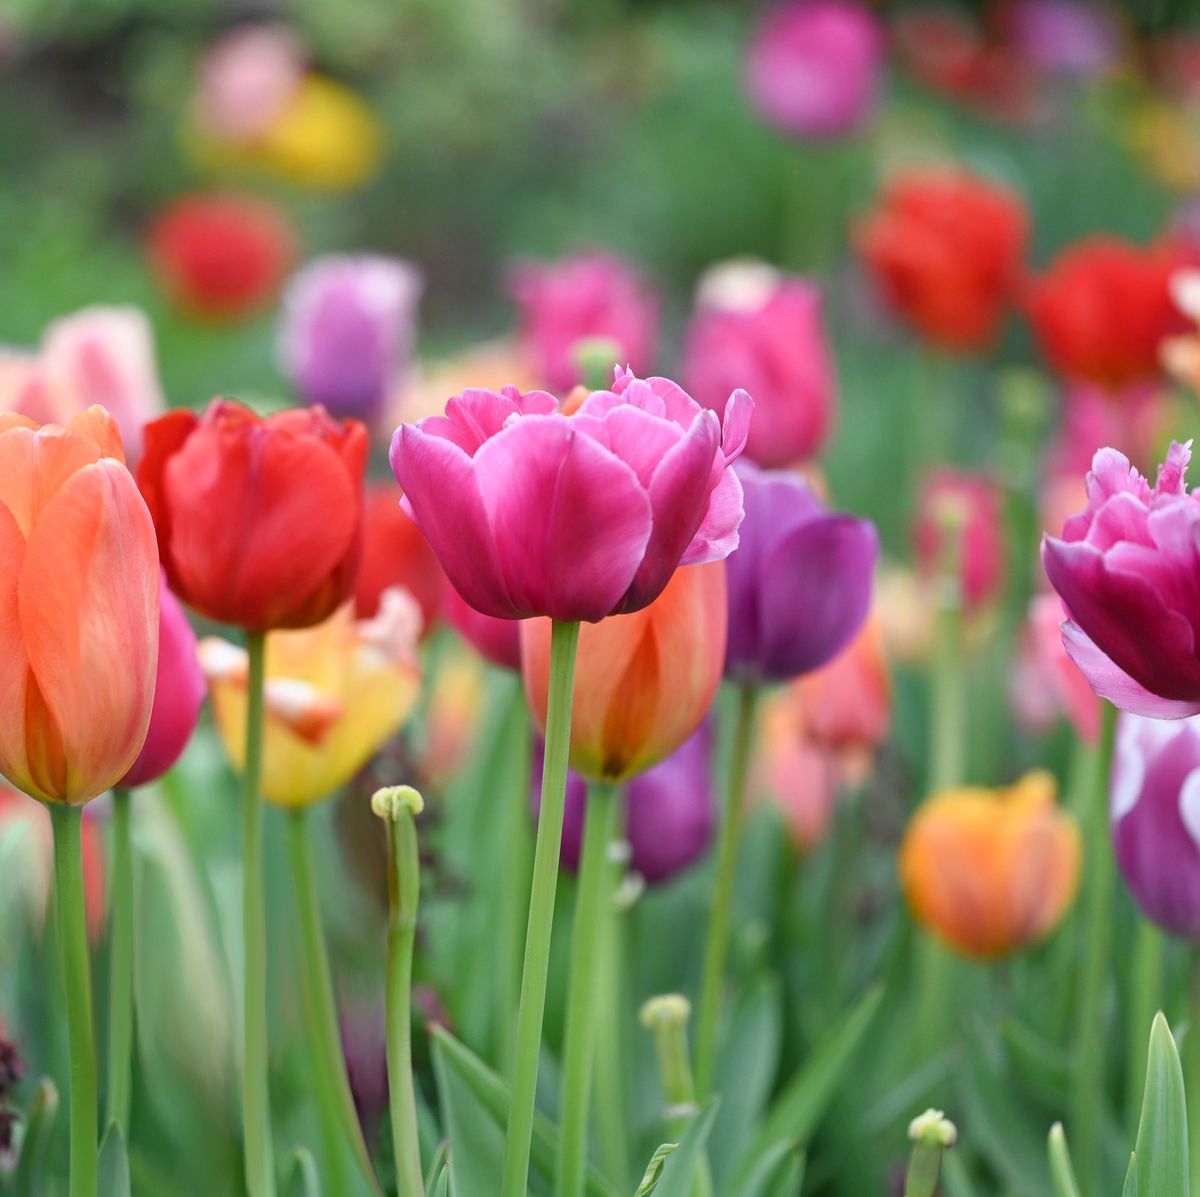 How to Plant Tulips - When to Plant Tulips